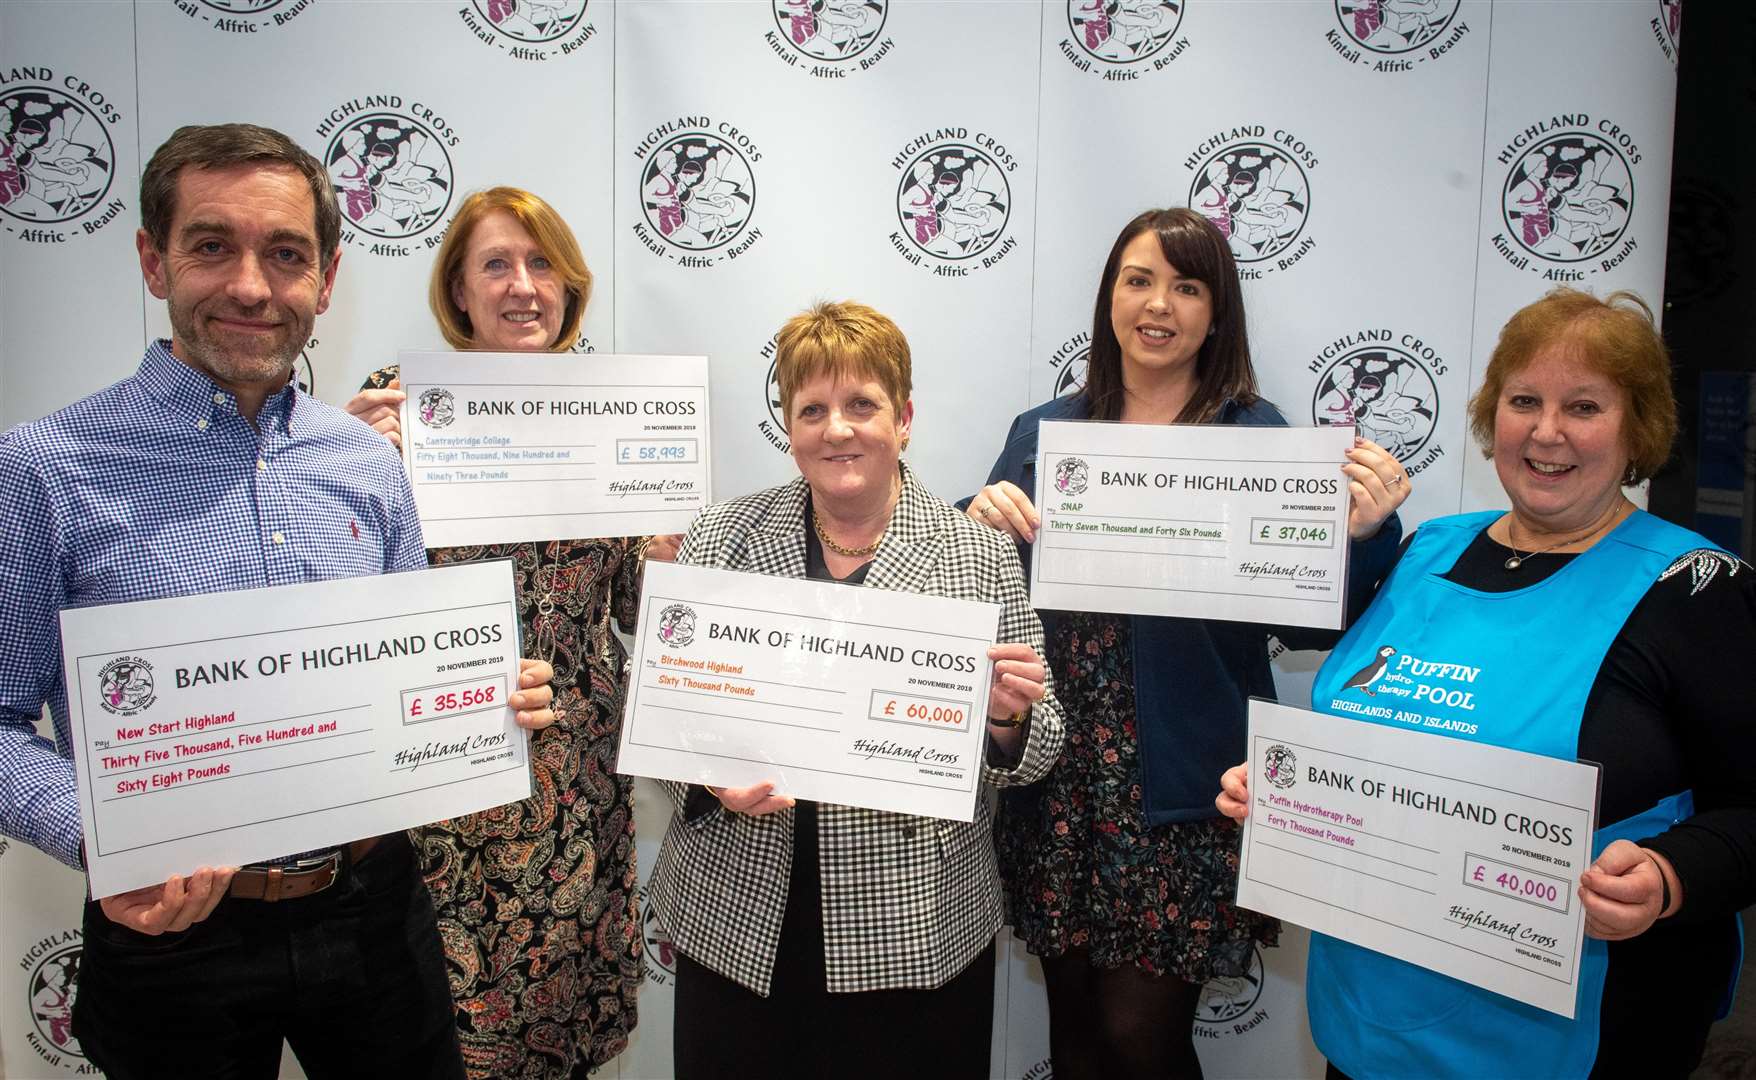 James Dunbar of New Start Highland, Miriam Veals of Cantraybridge College, Annabel Mowat of Birchwood Highland, Jenni Campbell (Special Needs Action Project) and Dr Helen Charley, Puffin Pool.